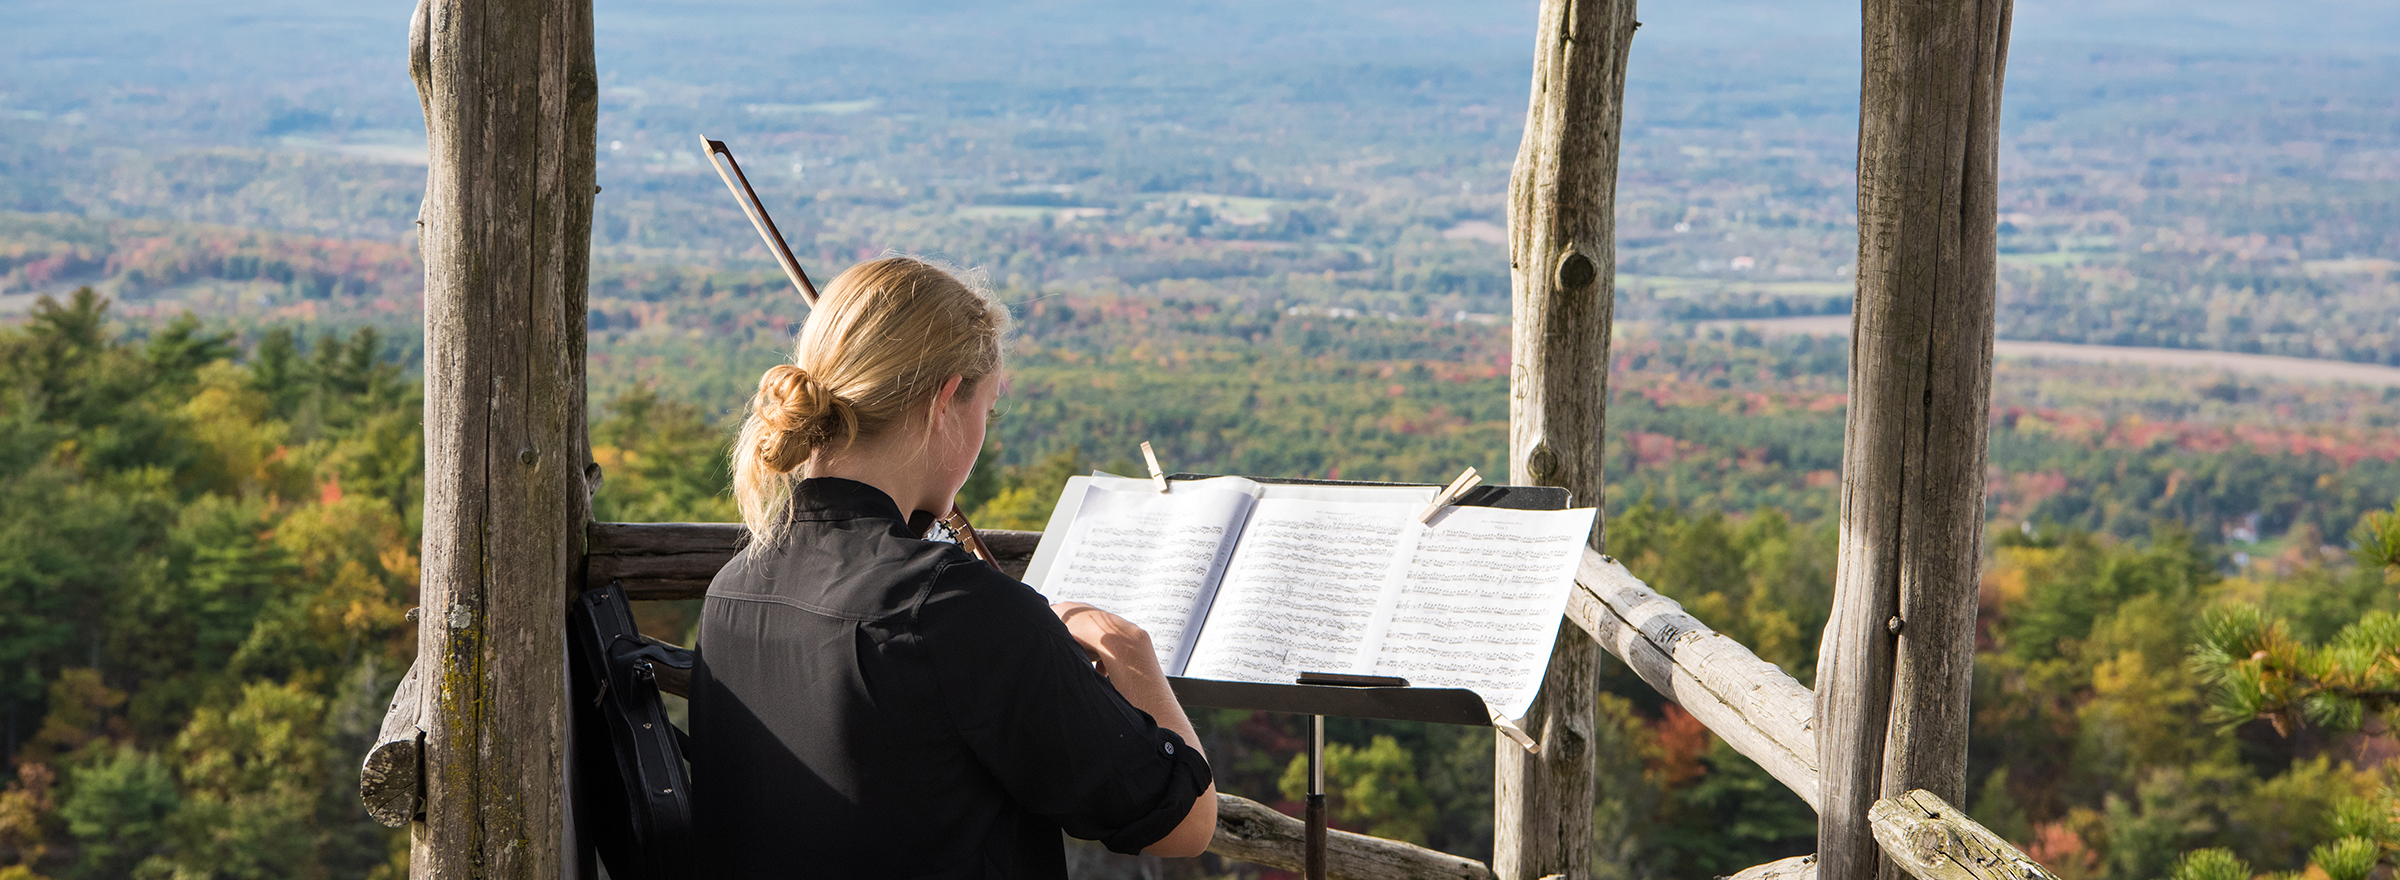 music performance at mohonk mountain house